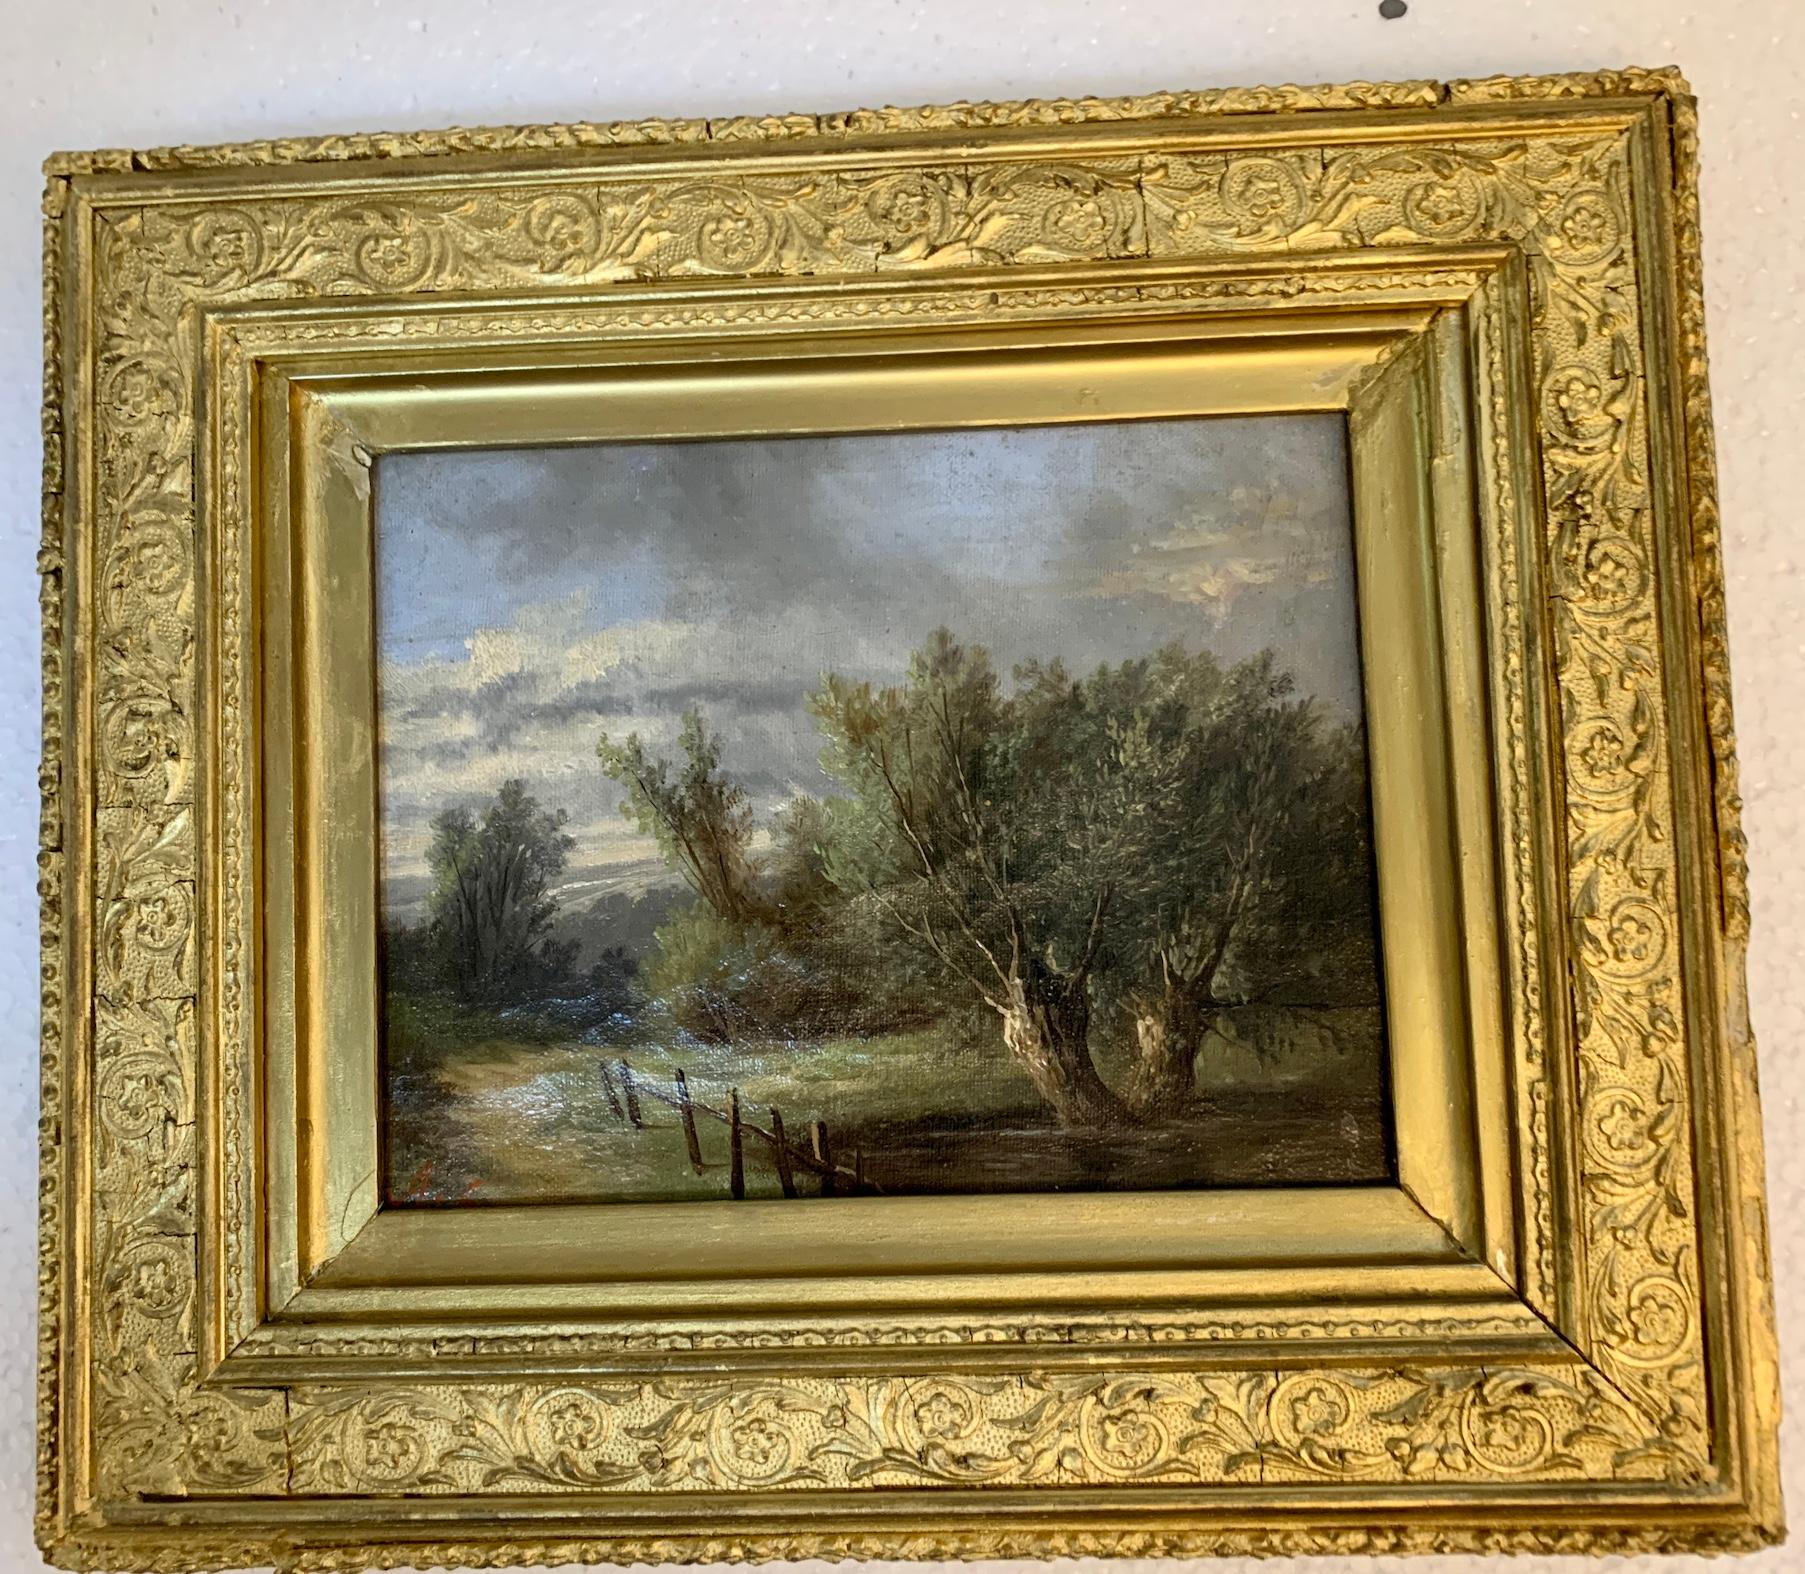 19th century English landscape with Oak and Yew trees on a pathway - Painting by Ada Stone